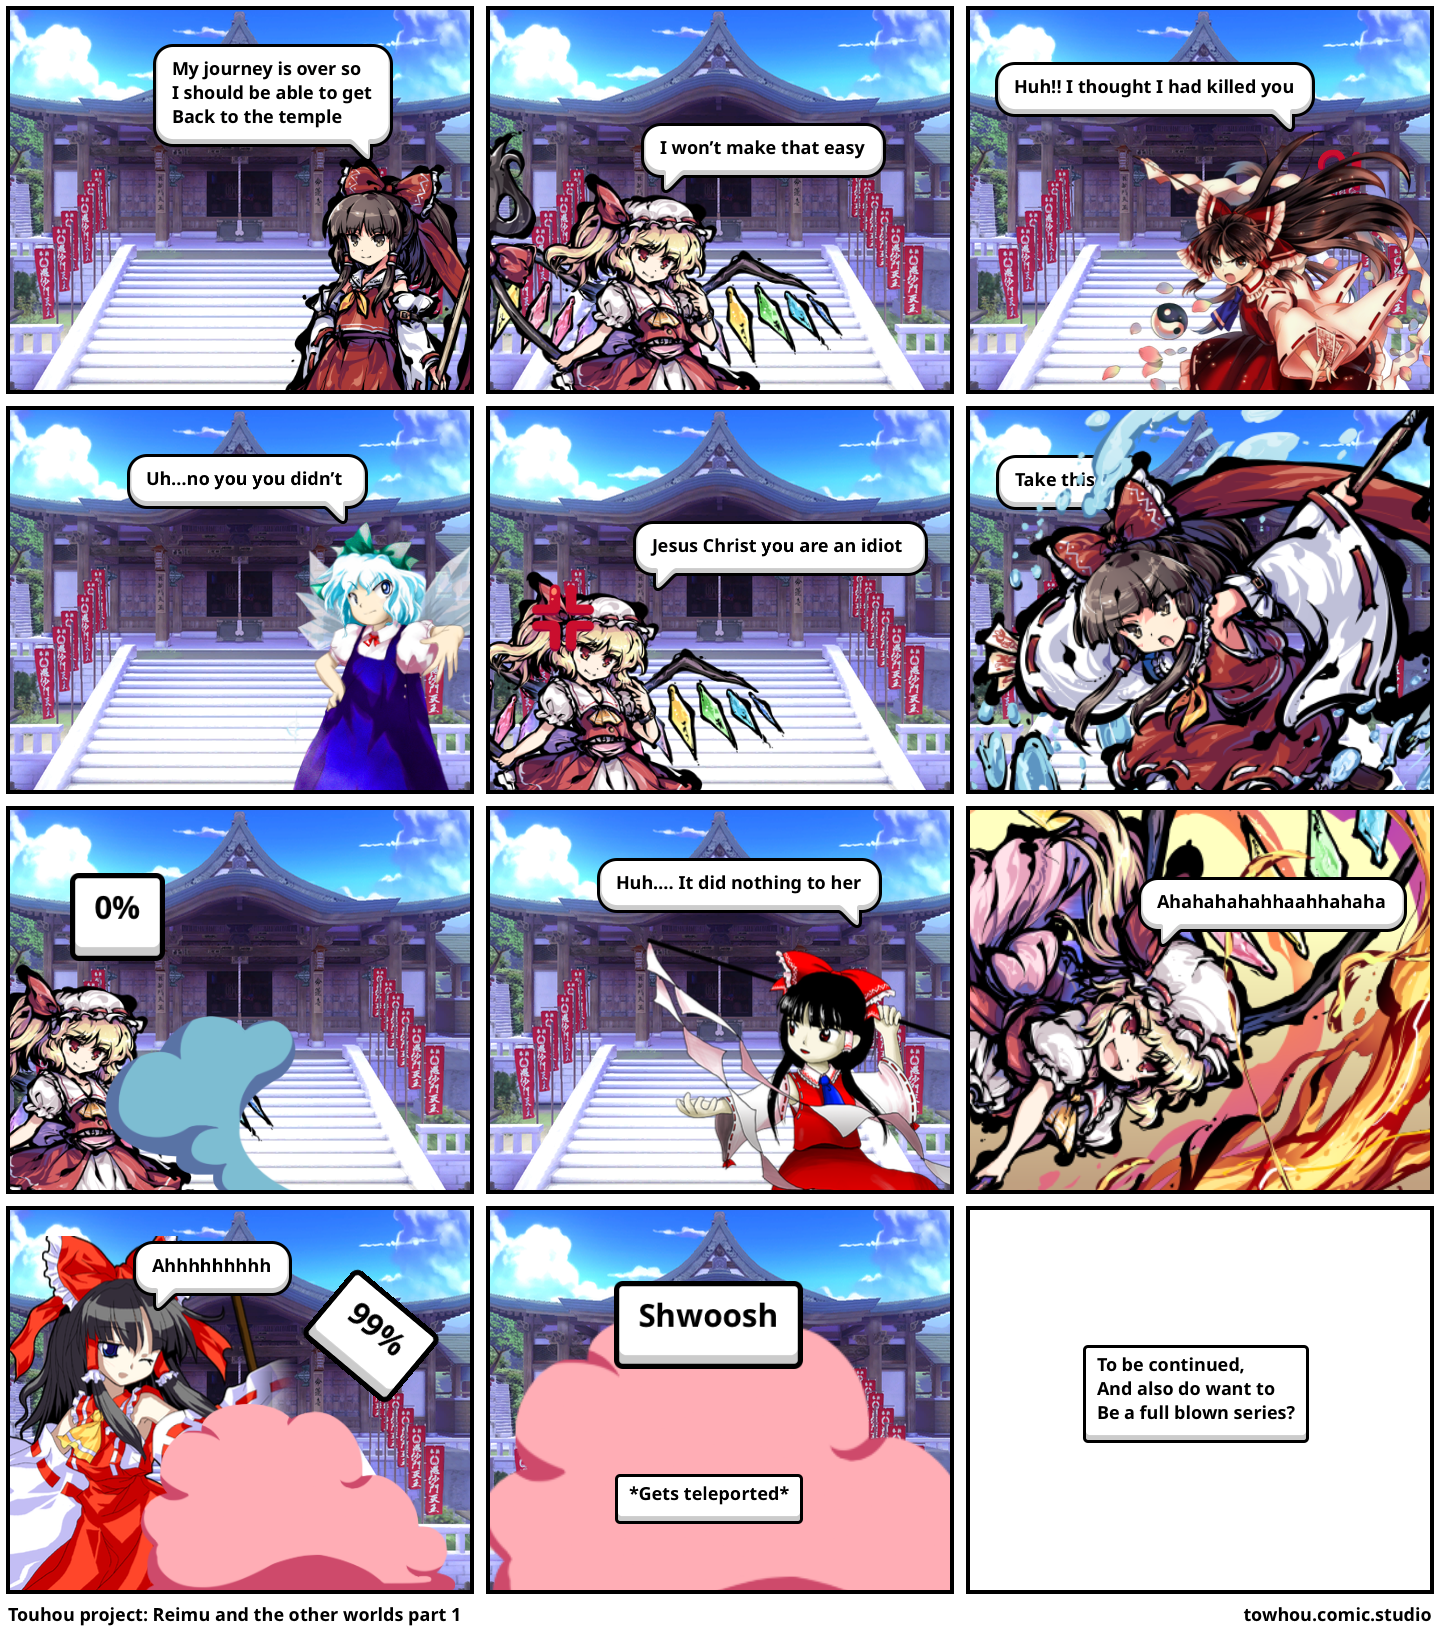 Touhou project: Reimu and the other worlds part 1